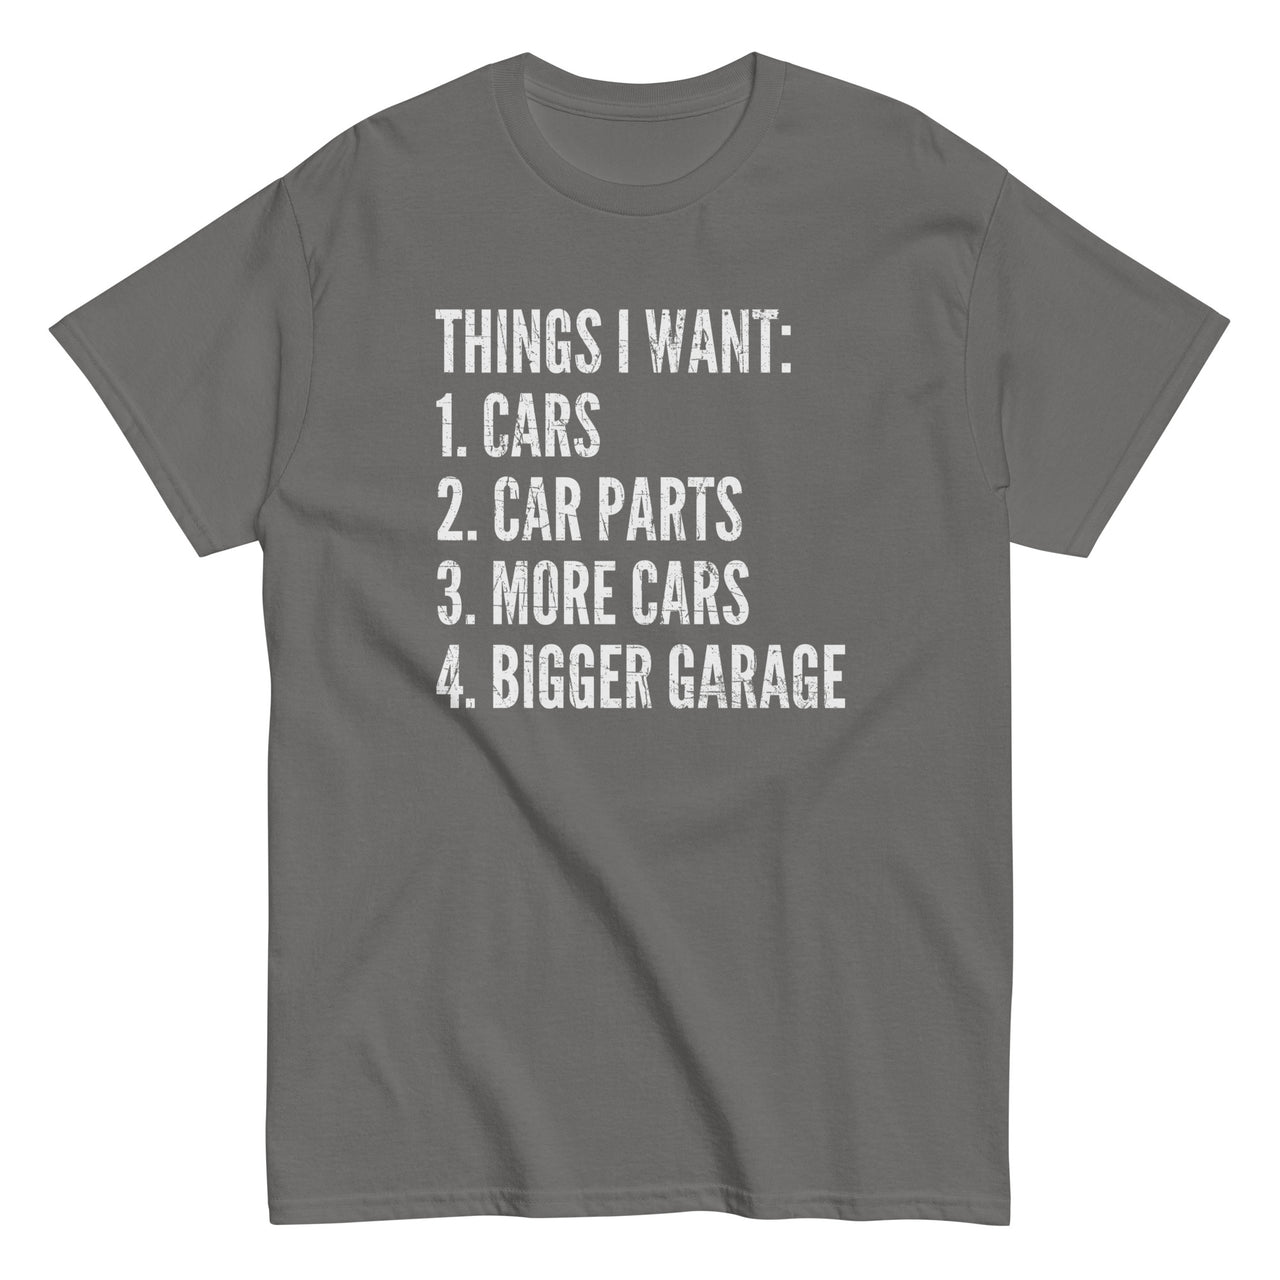 Funny Car Enthusiast T-Shirt Things I Want in charcoal